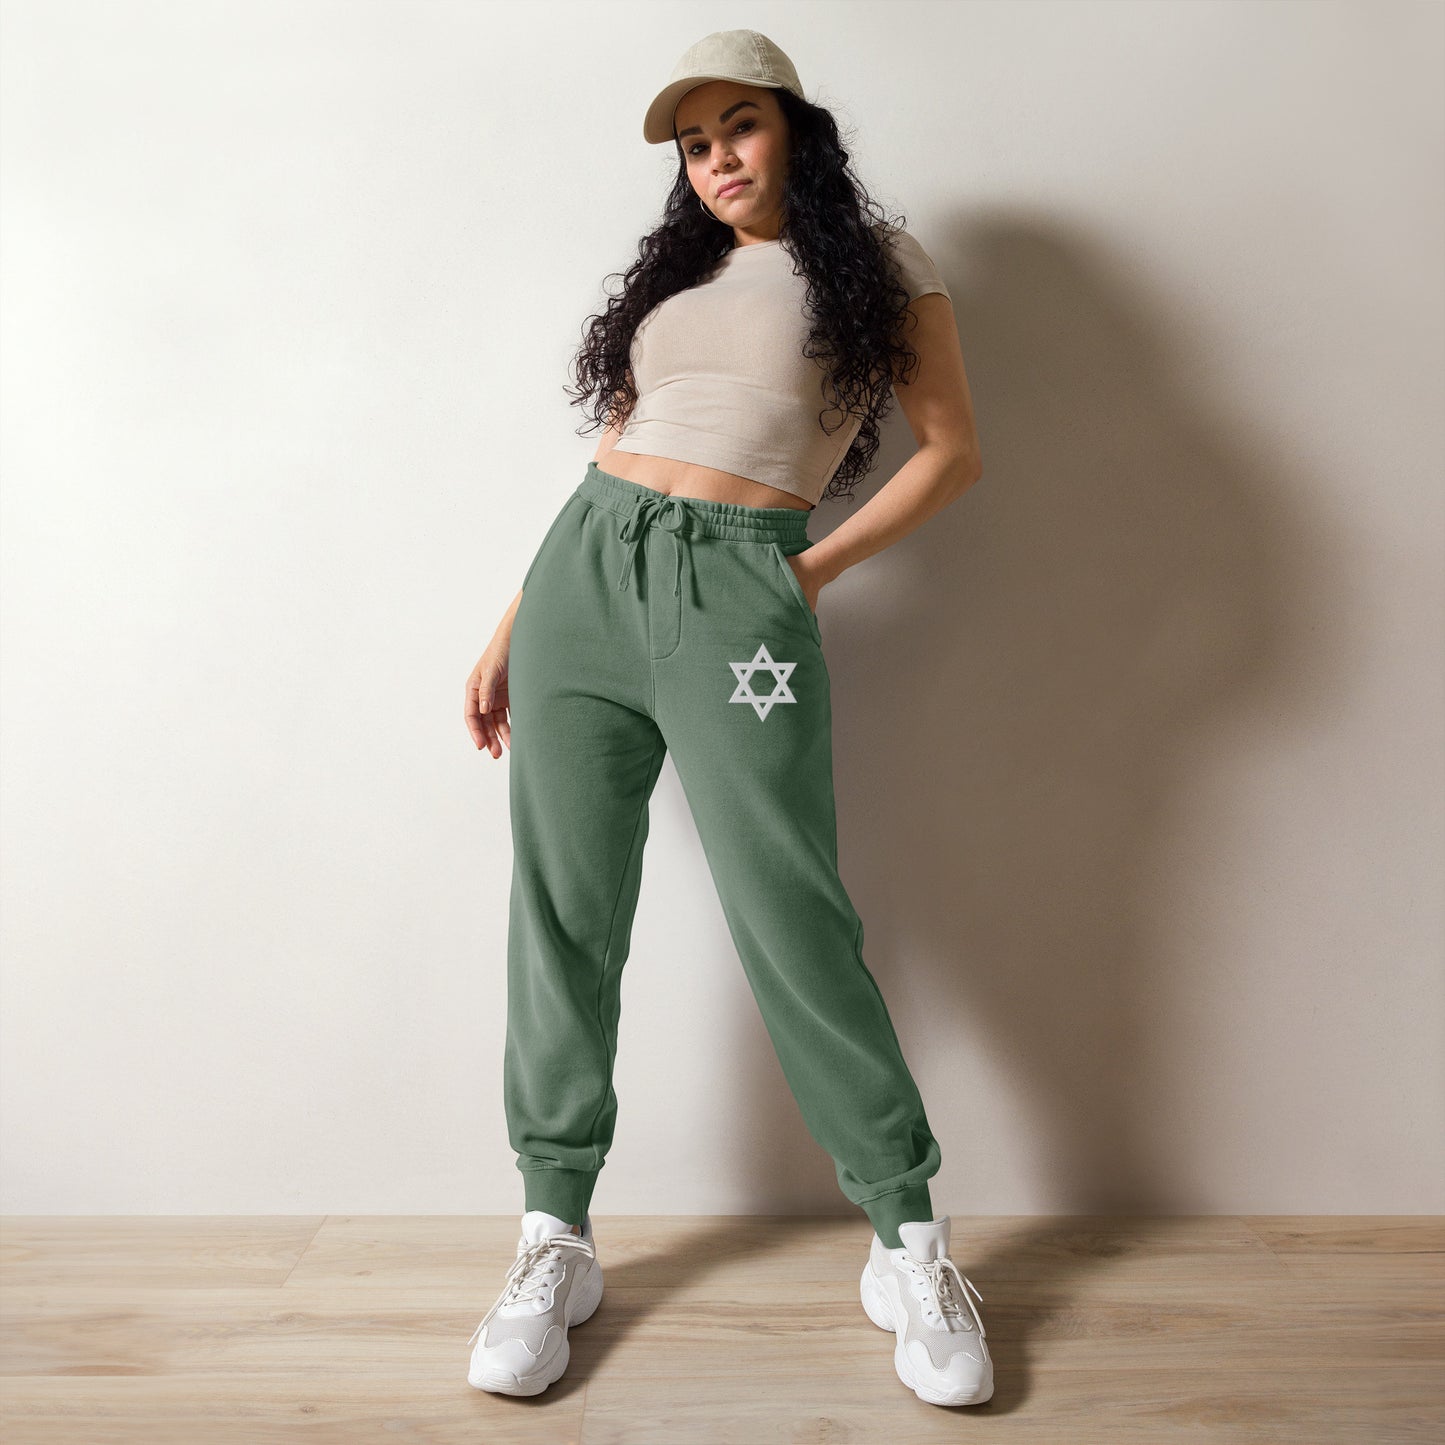 Magen David (Star of David) Embroidered Unisex pigment-dyed sweatpants